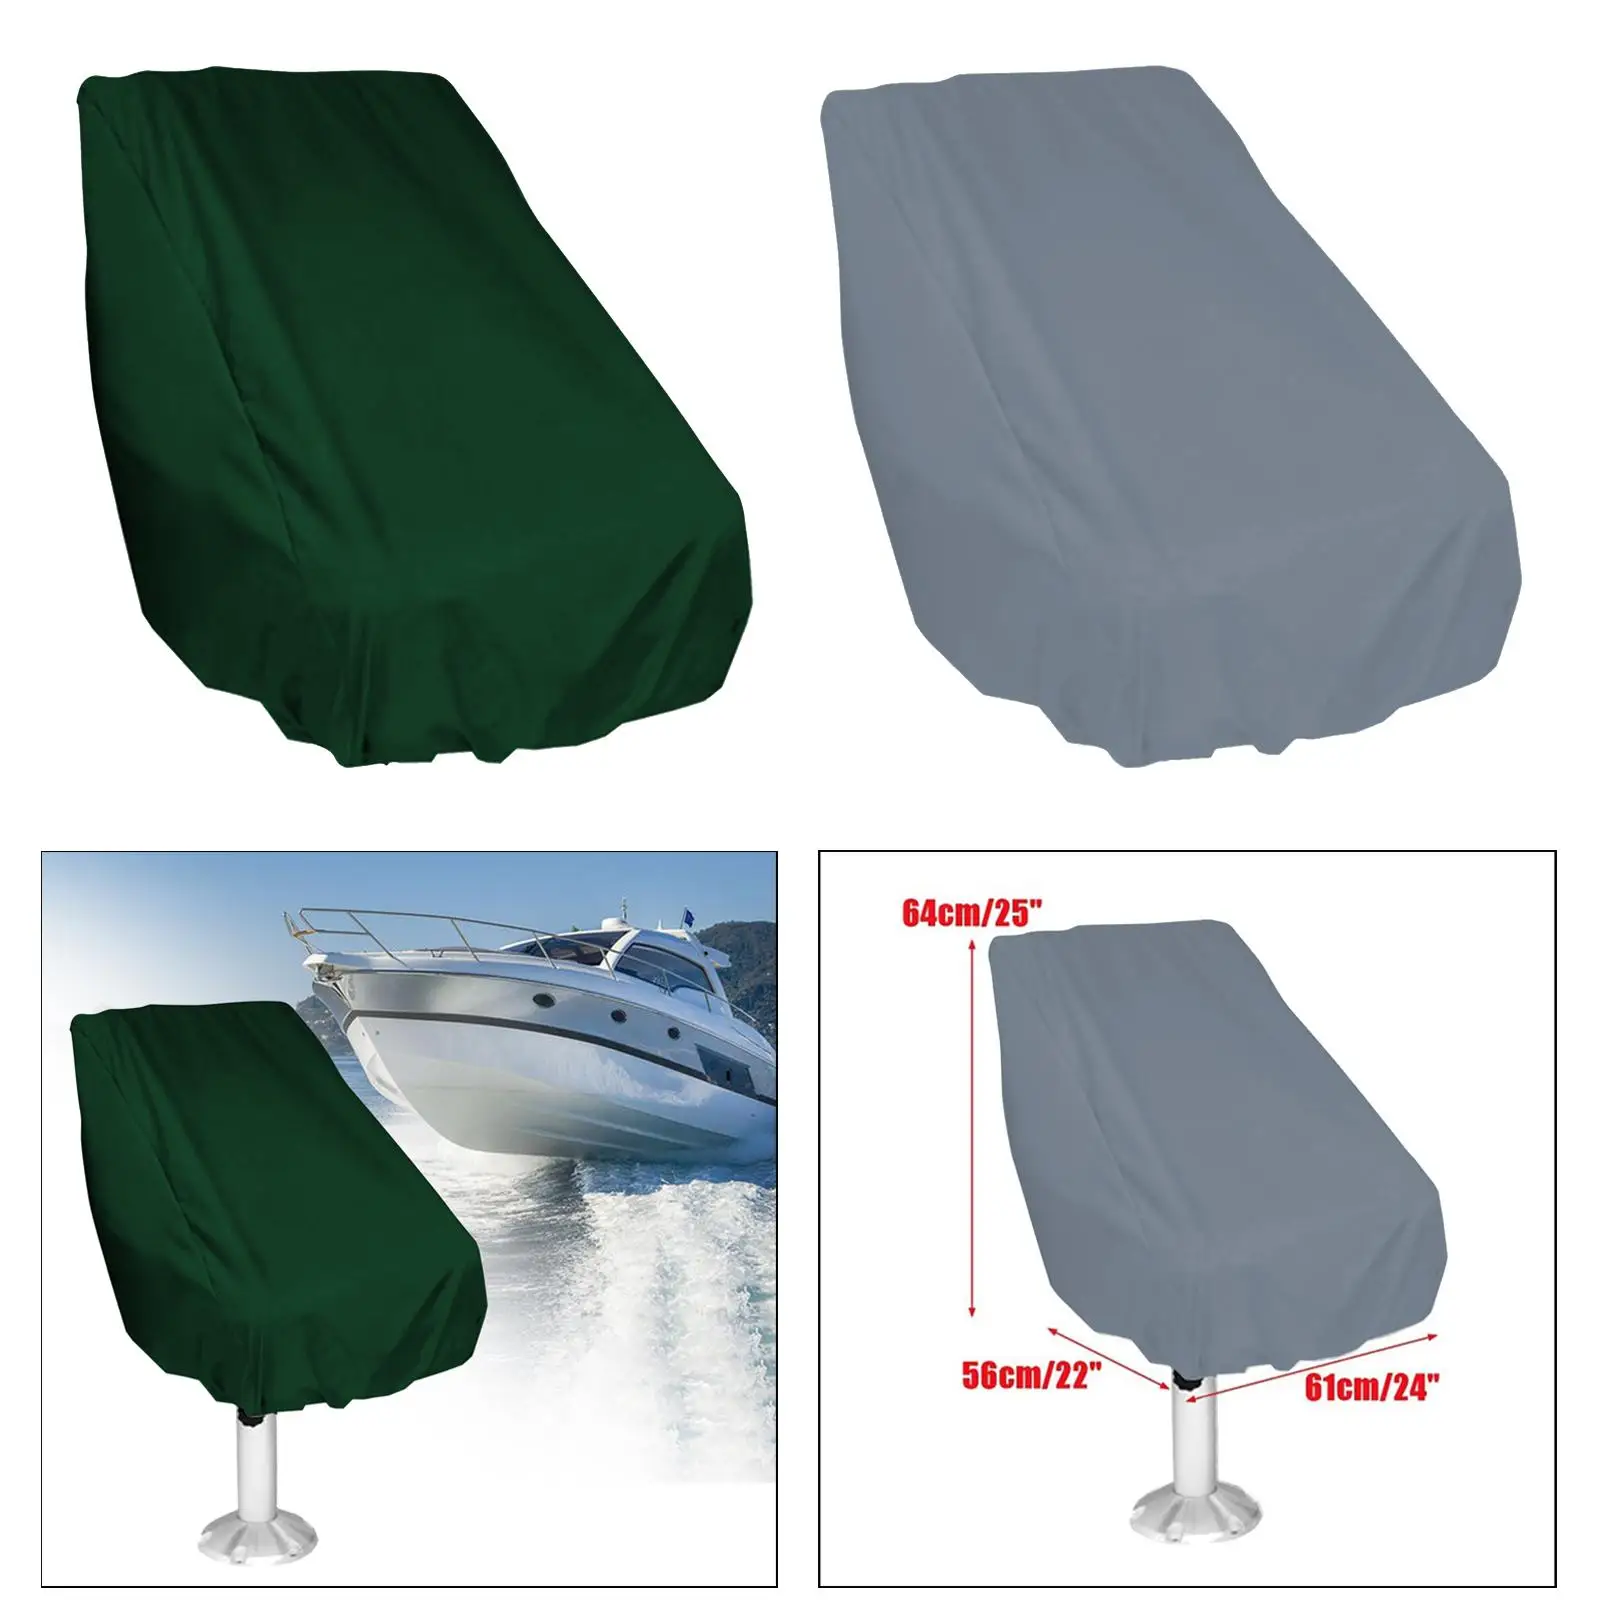  Seat  Weather Resistant Waterproof Outdoor Oxford Fabric Durable